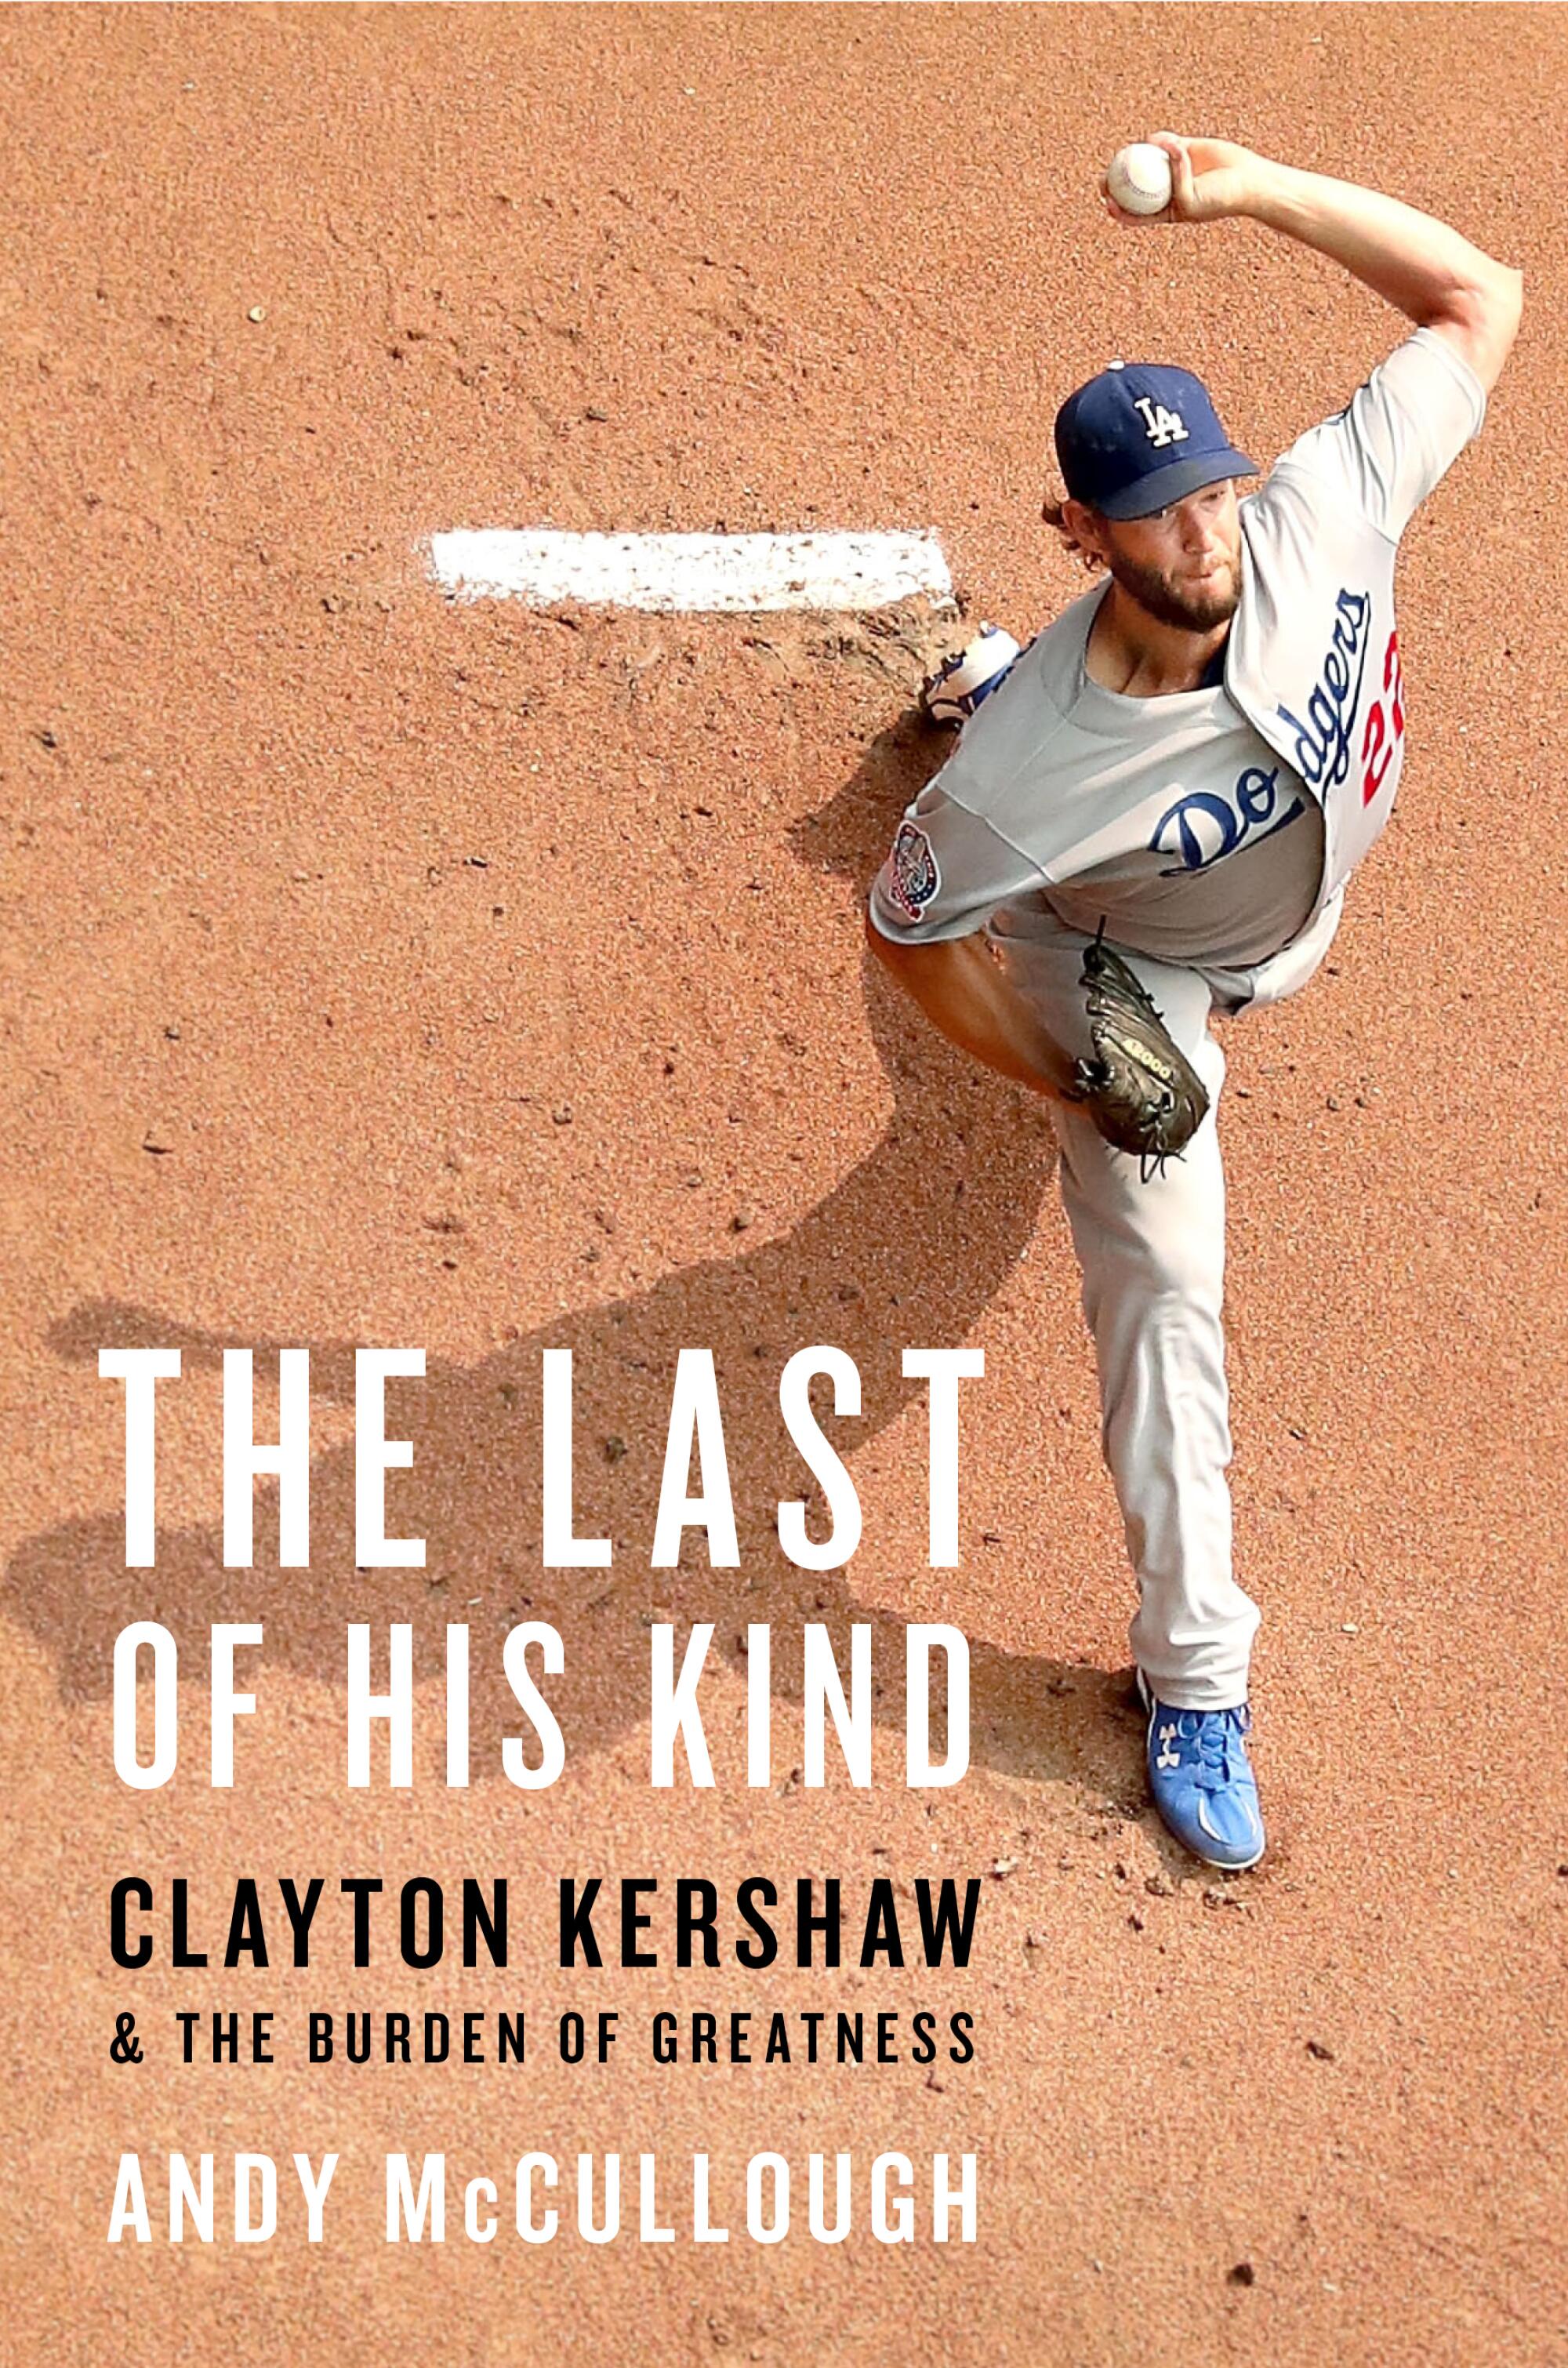 Clayton Kershaw throws a pitch from the mound in a photo featured on the cover the book "Last of His Kind."